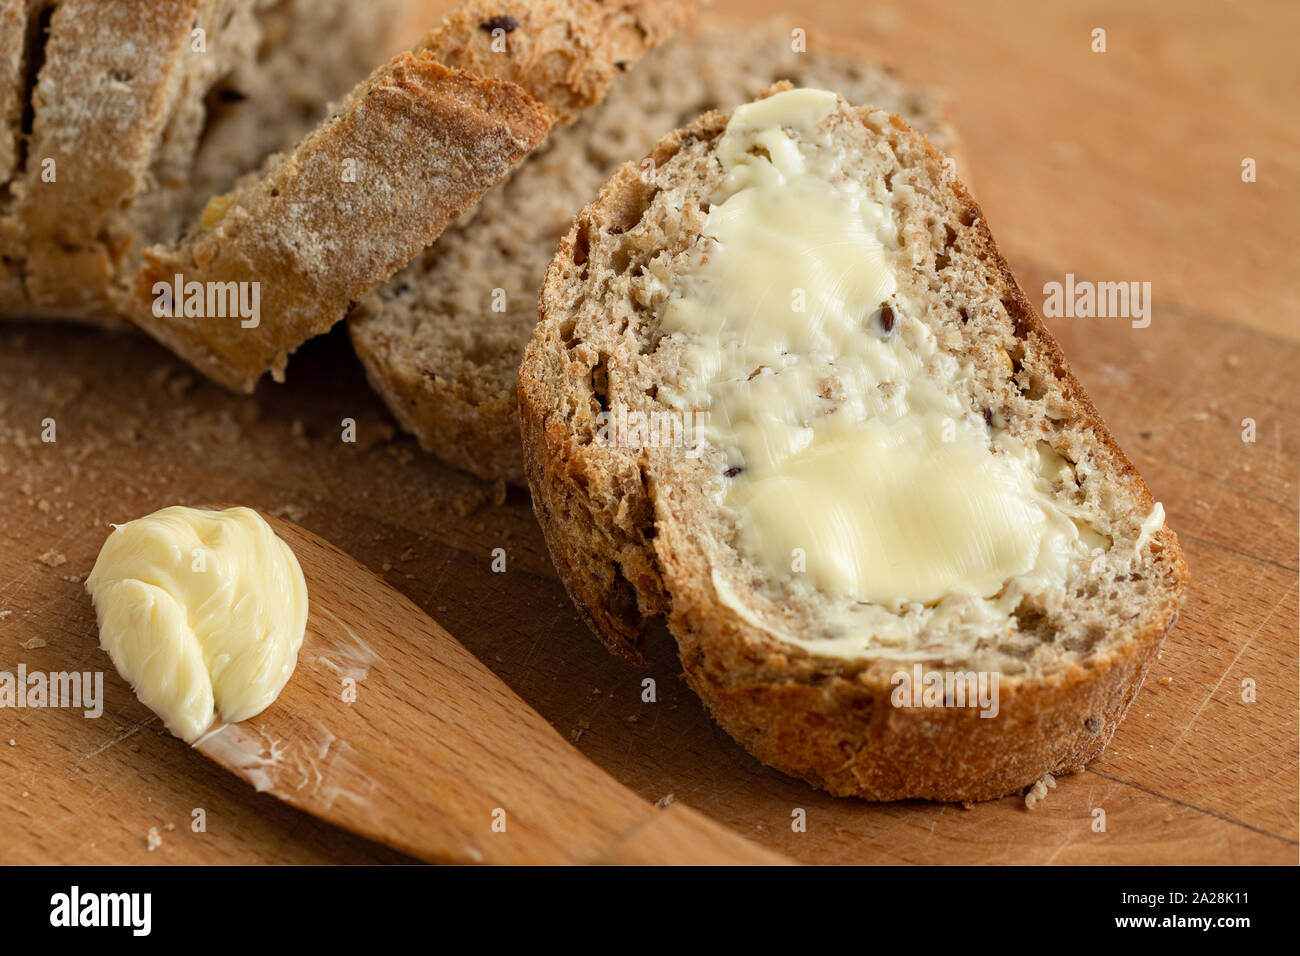 Closeup of buttered slice of whole wheat rustic bread next to cut bread and wood knife. Light wood board. Stock Photo